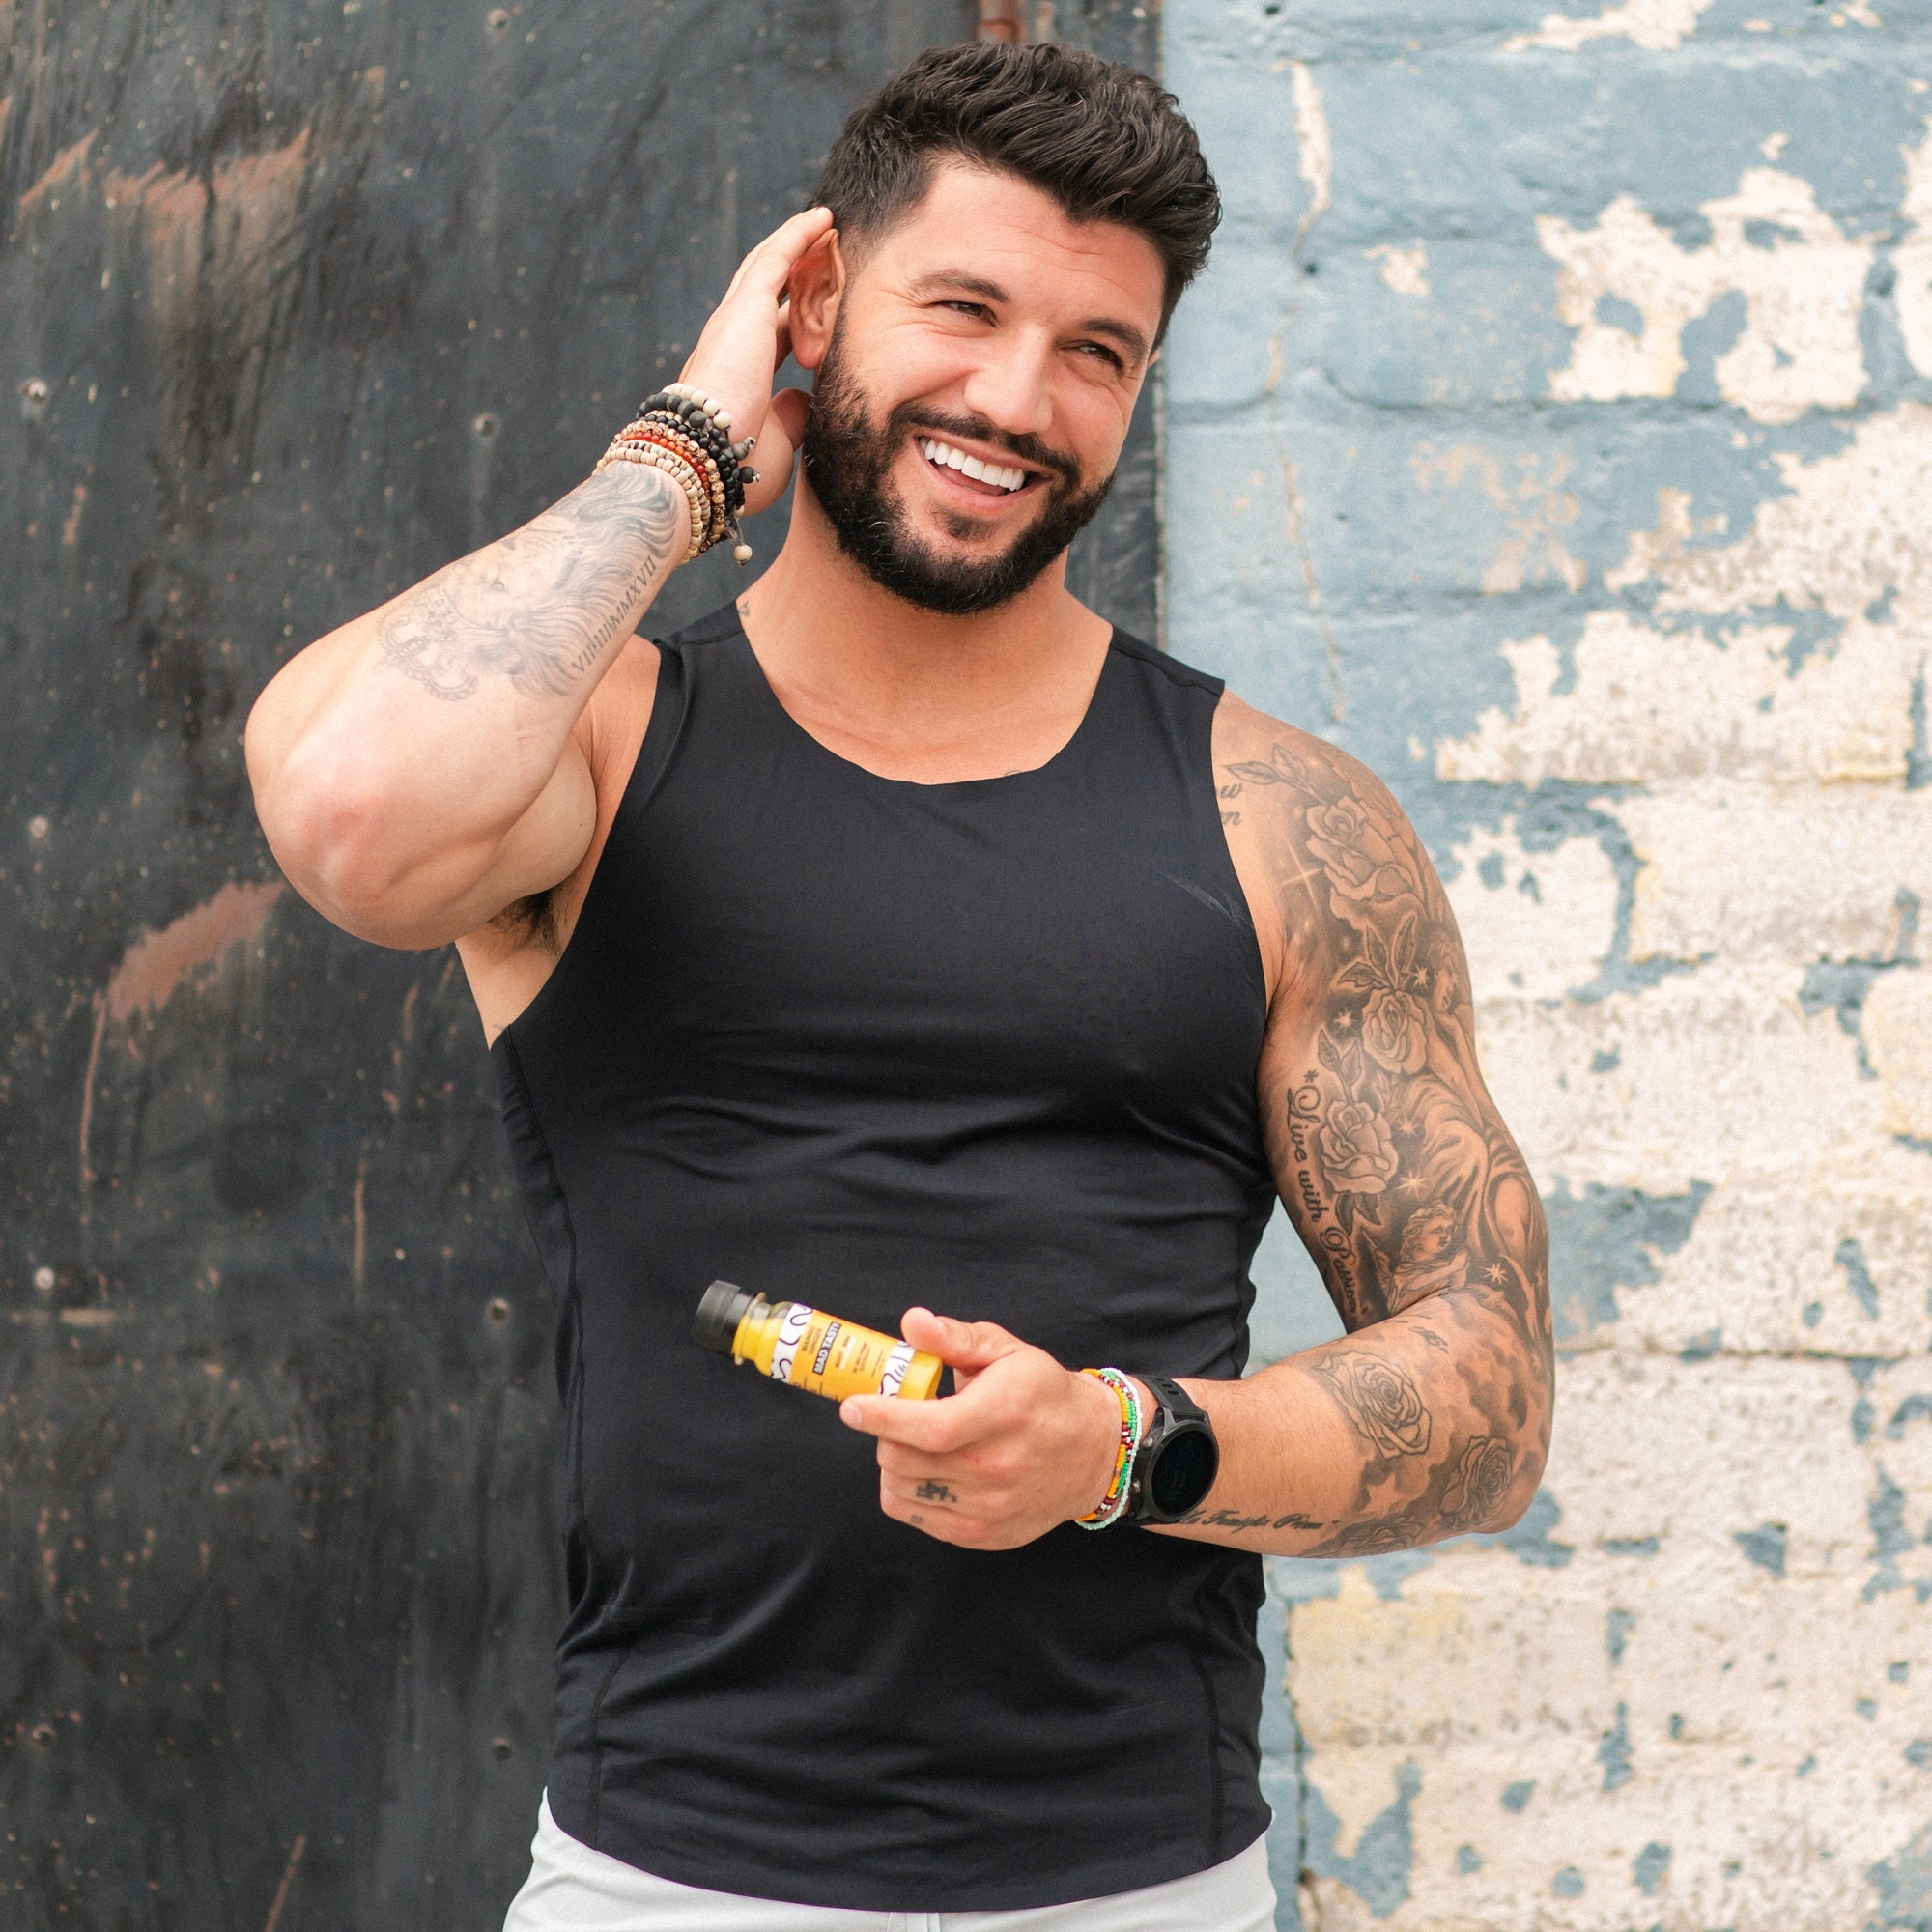 Exclusive: Fitness Expert, Entrepreneur, and Influencer Brian Mazza Talks MAD TASTY, Summer Fitness, and Exercise Tips